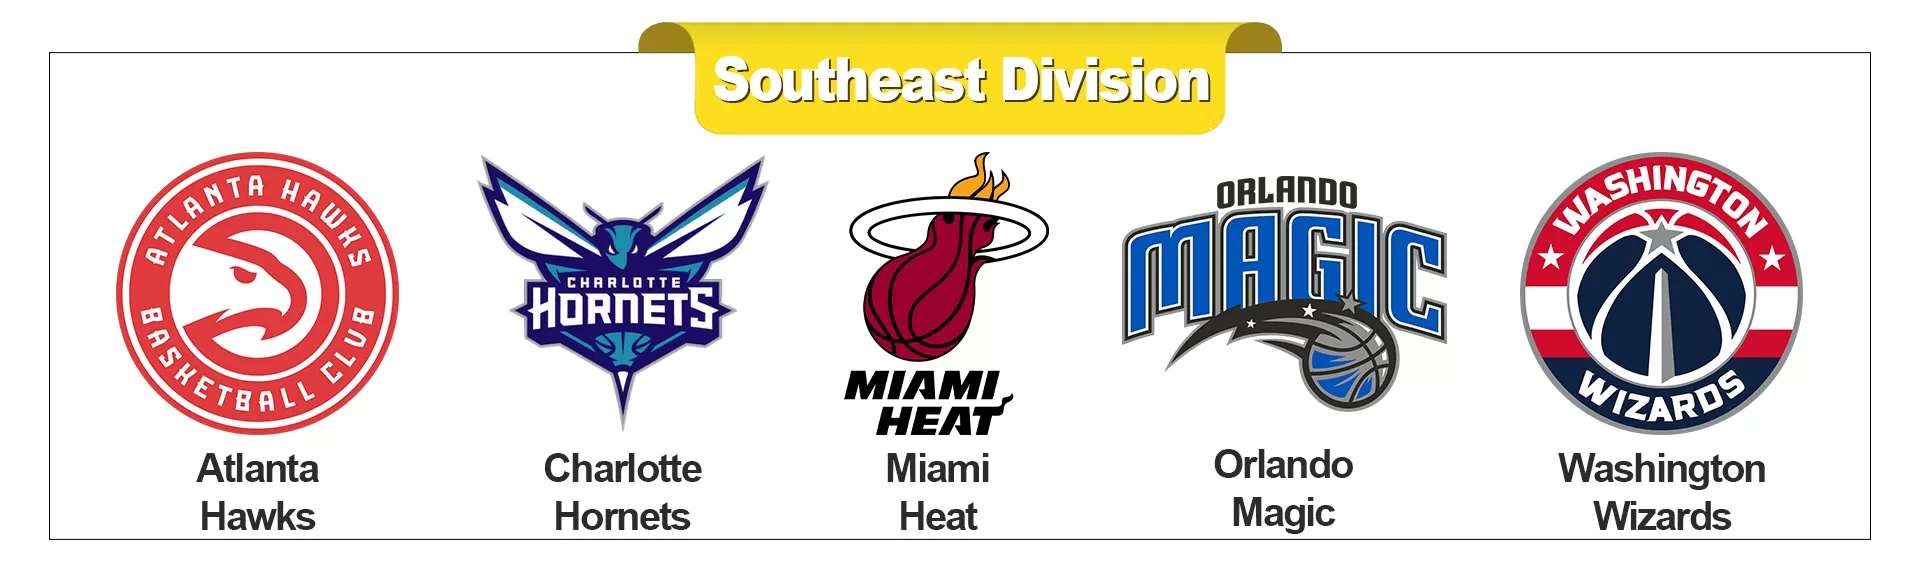 South East Division - buybasketballnow